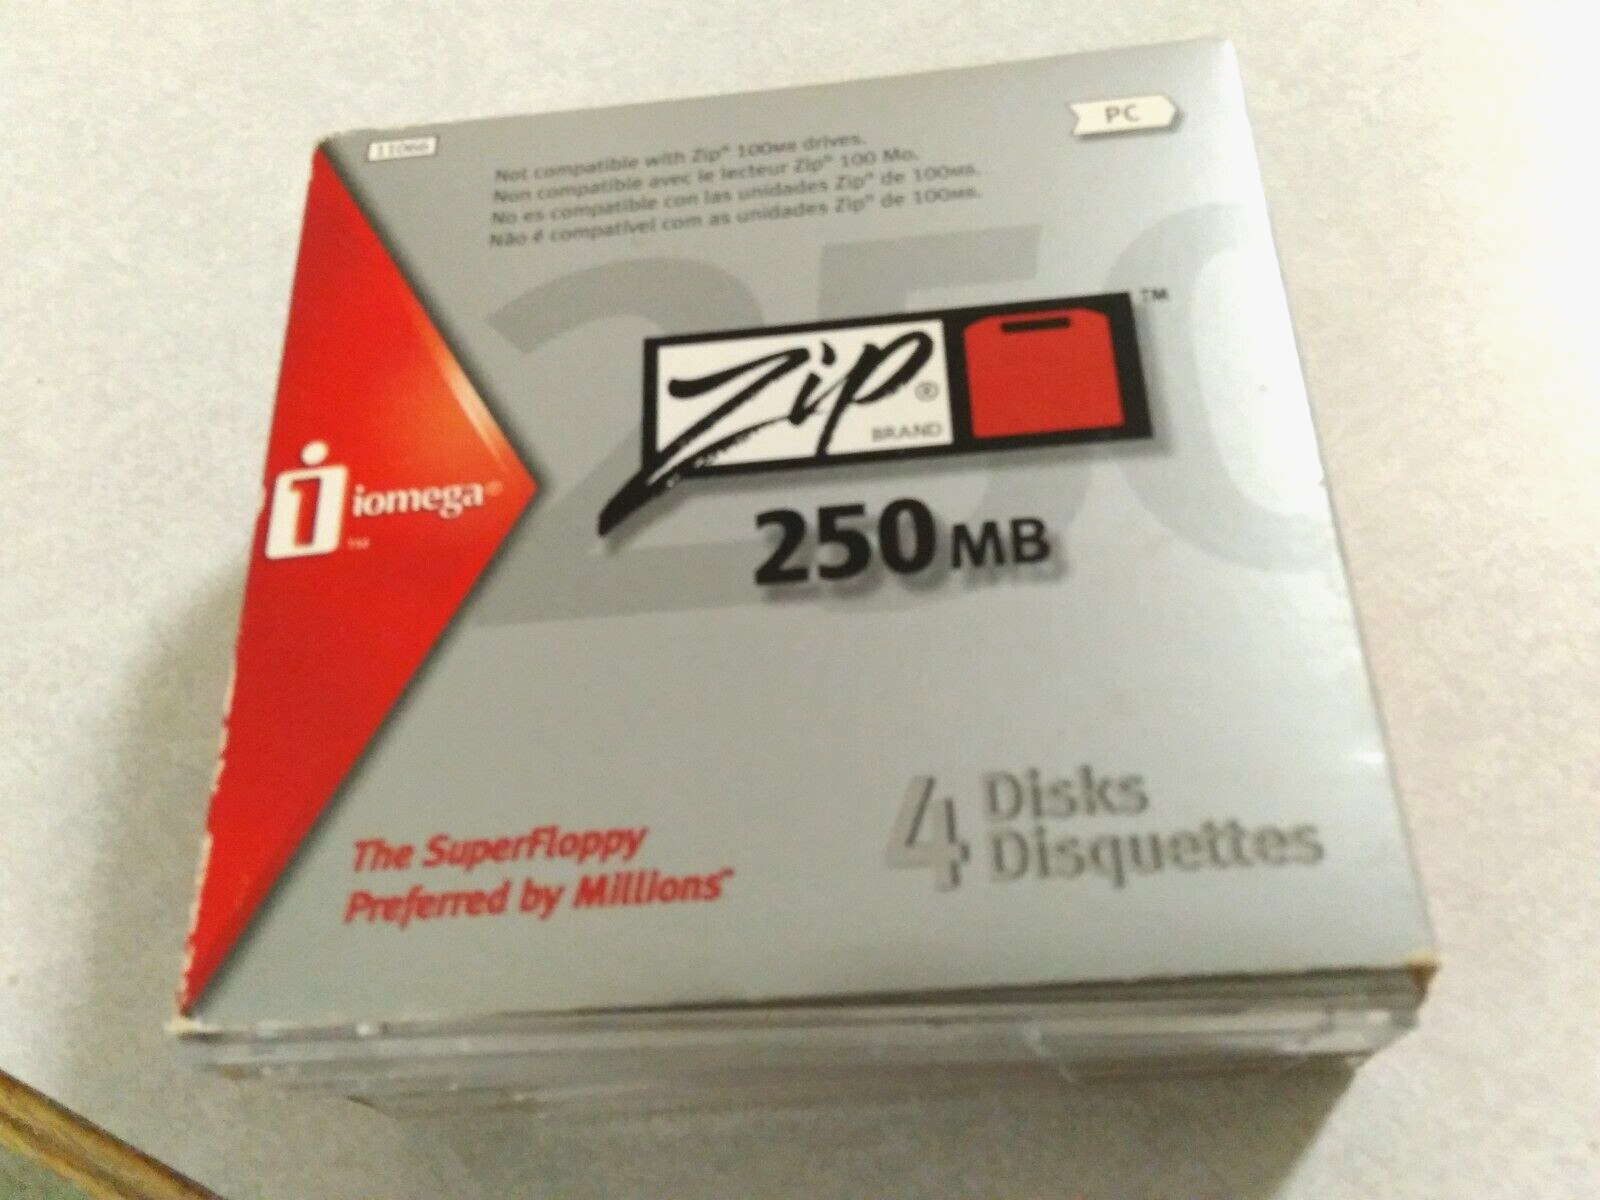 Package of Four Iomega Zip Brand 250MB The Super Floppy Disc with Jewell Cases